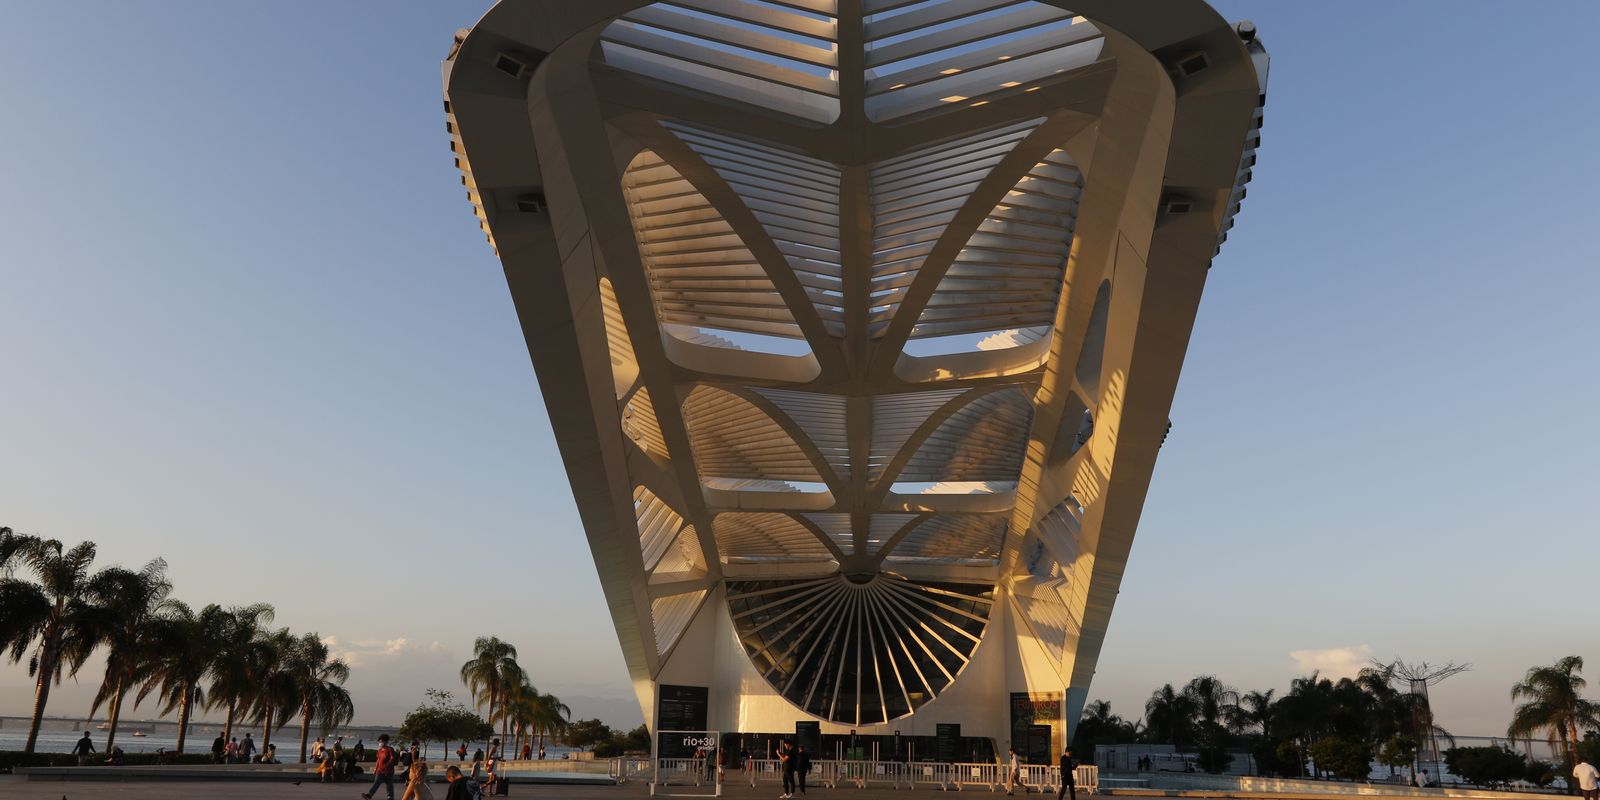 The Museum of Tomorrow initiates educational projects in Rio